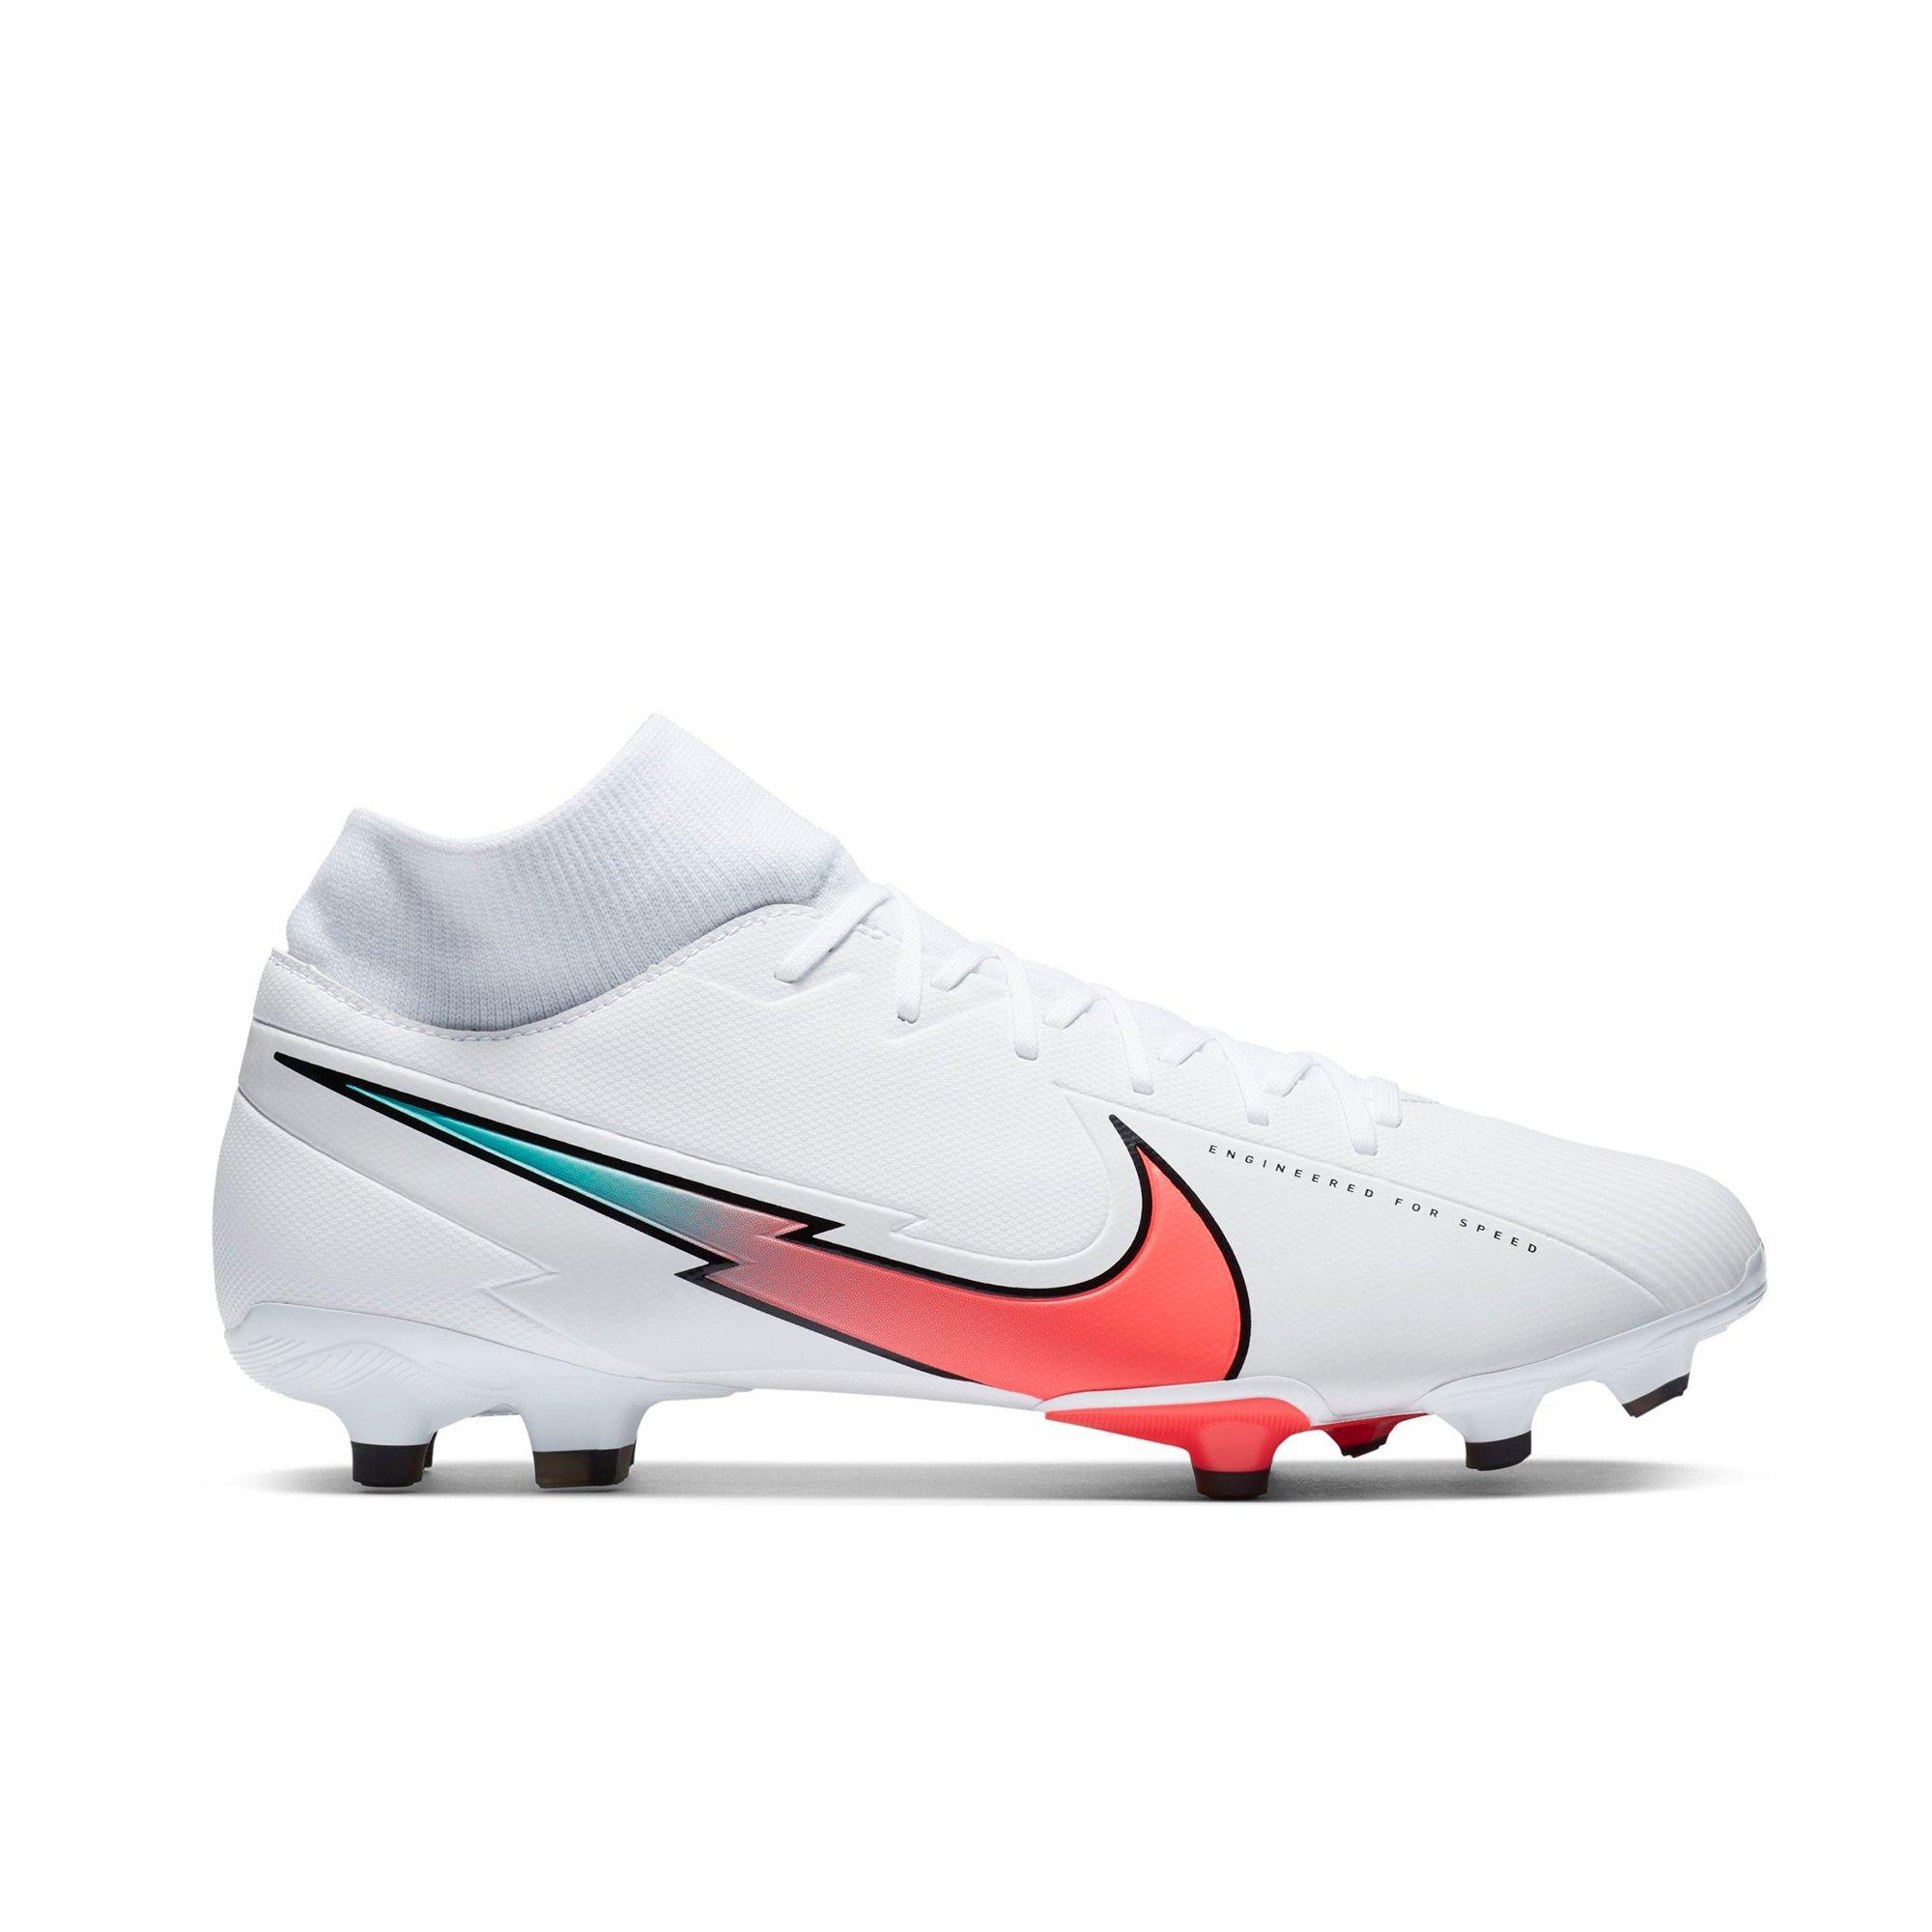 academy sports soccer cleats